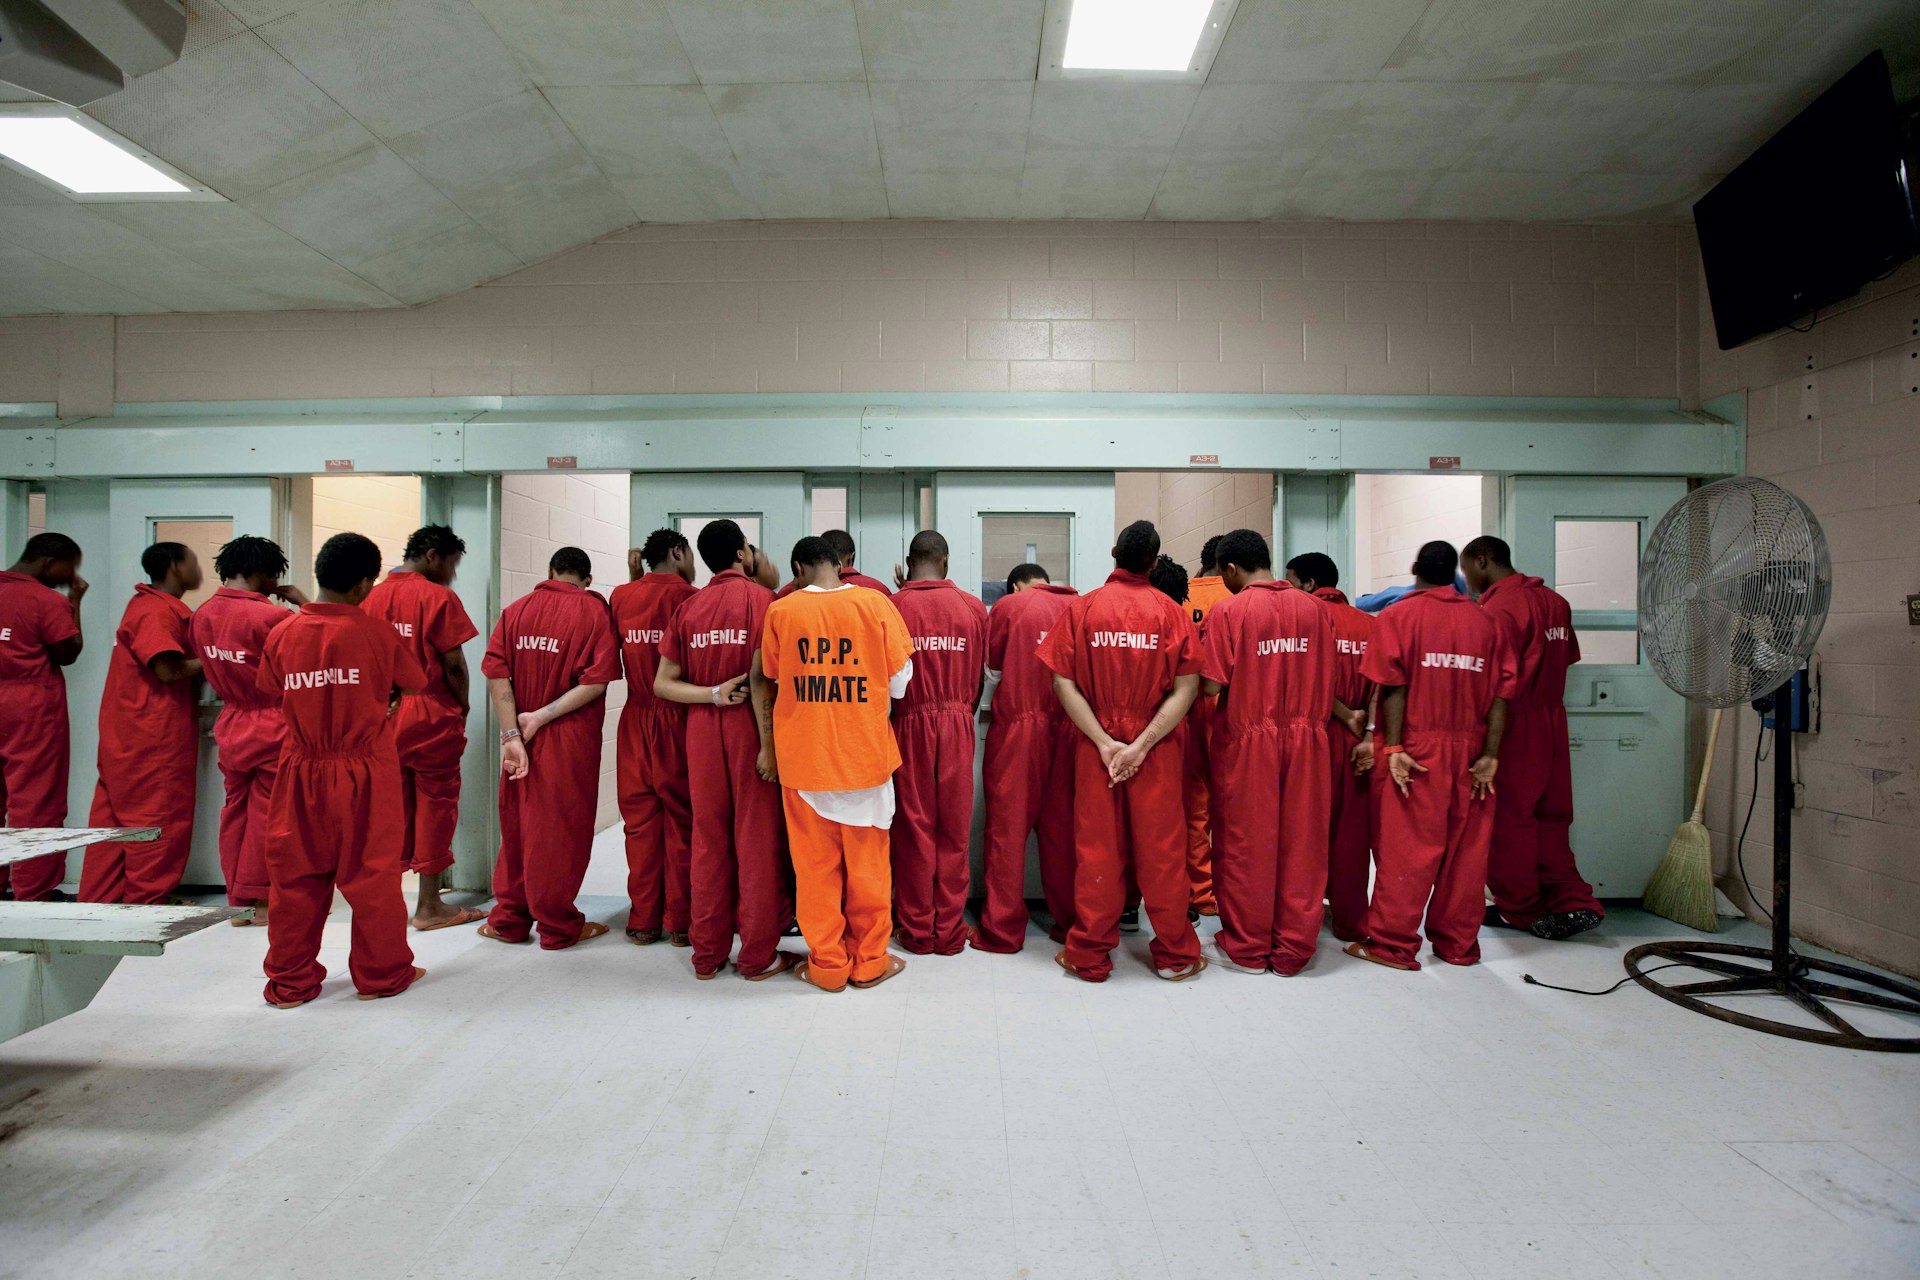 Orleans-Parish-Prison,-New-Orleans,-Louisiana-2009.-From-the-series-Juvenile-in-Justice-©-Richard-Ross